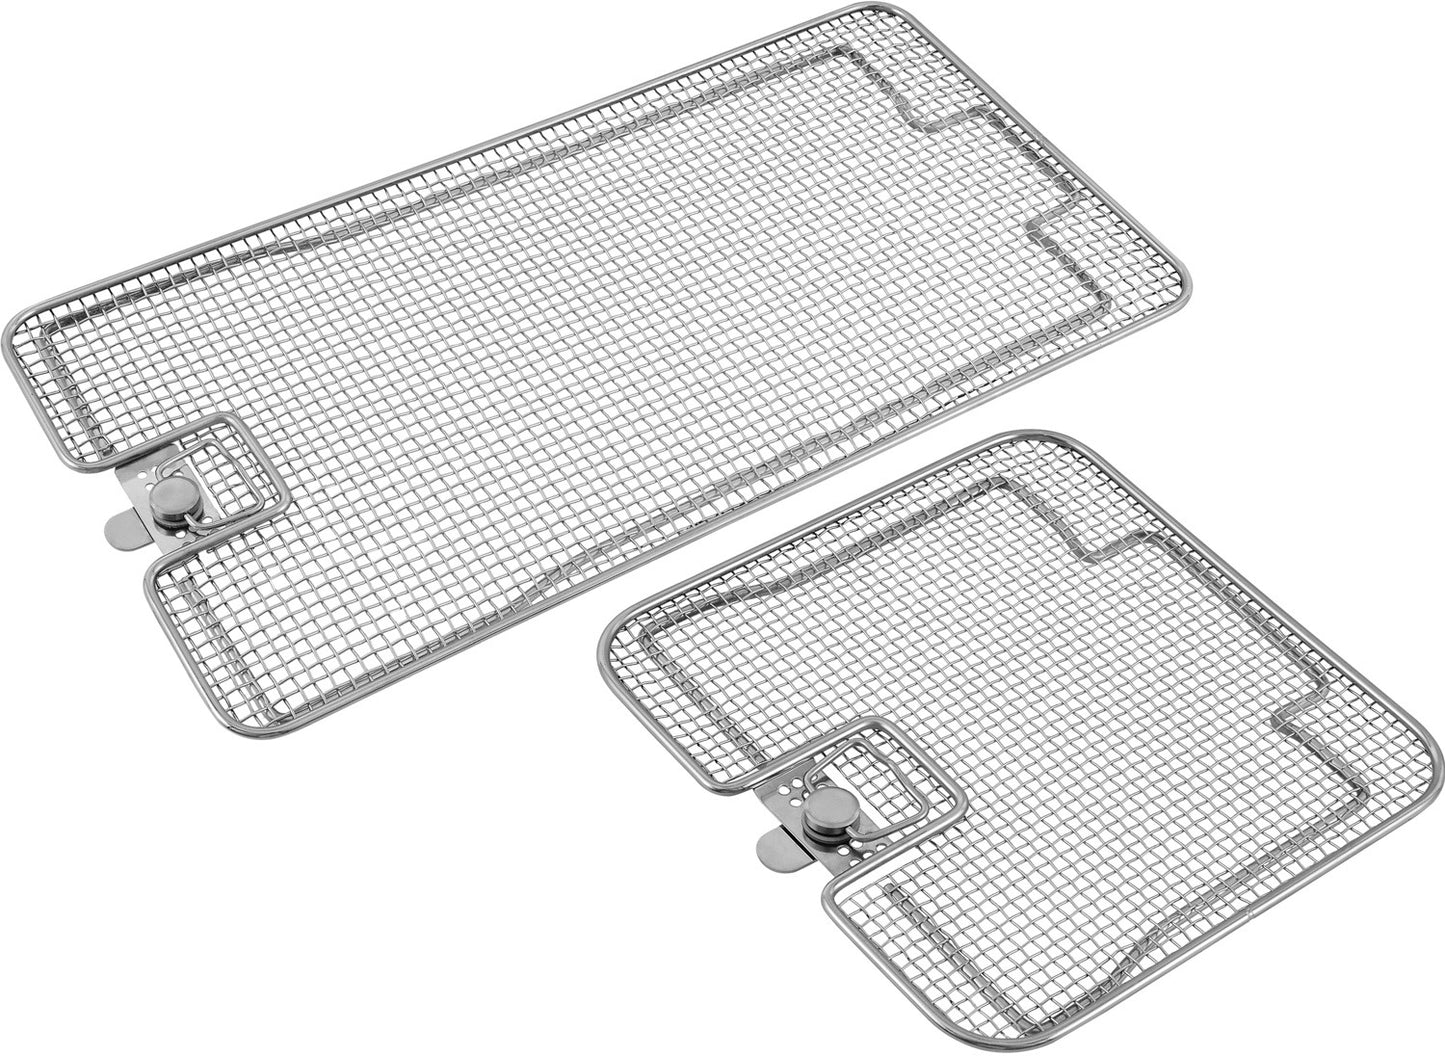 Lids for Crimped Wire Mesh Sterilization Baskets, Double Frame-WP-4455DCW